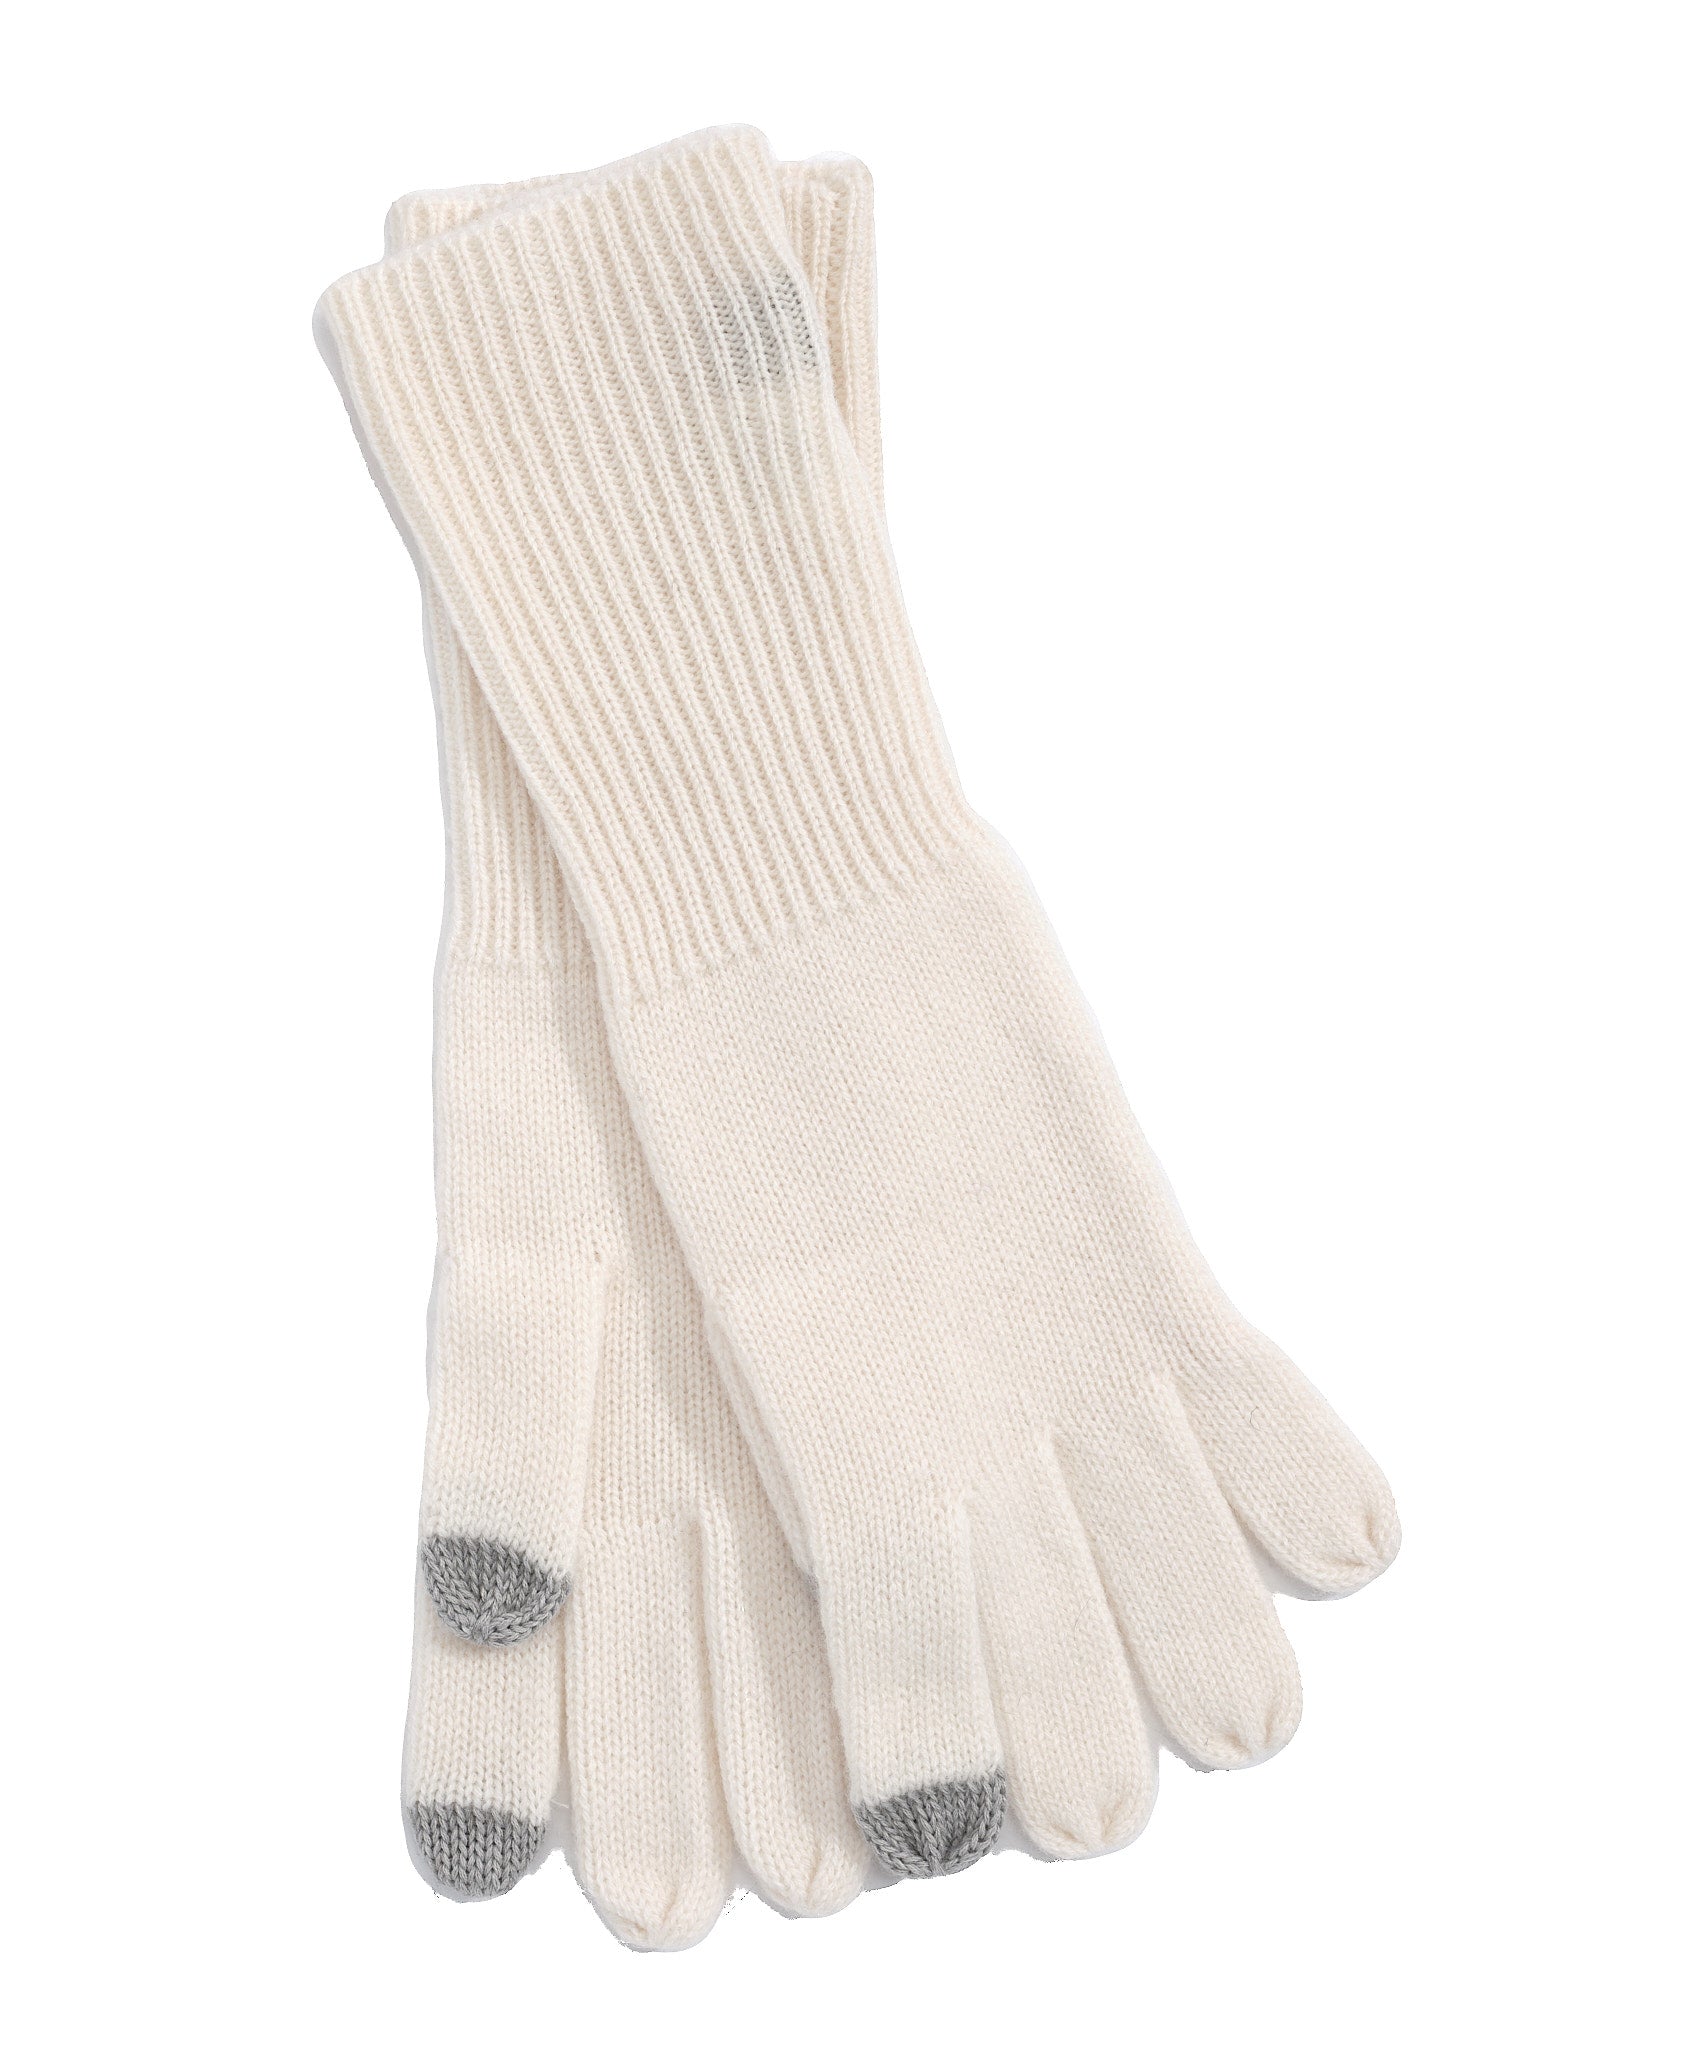 Wool/Cashmere  Gloves in color Cream